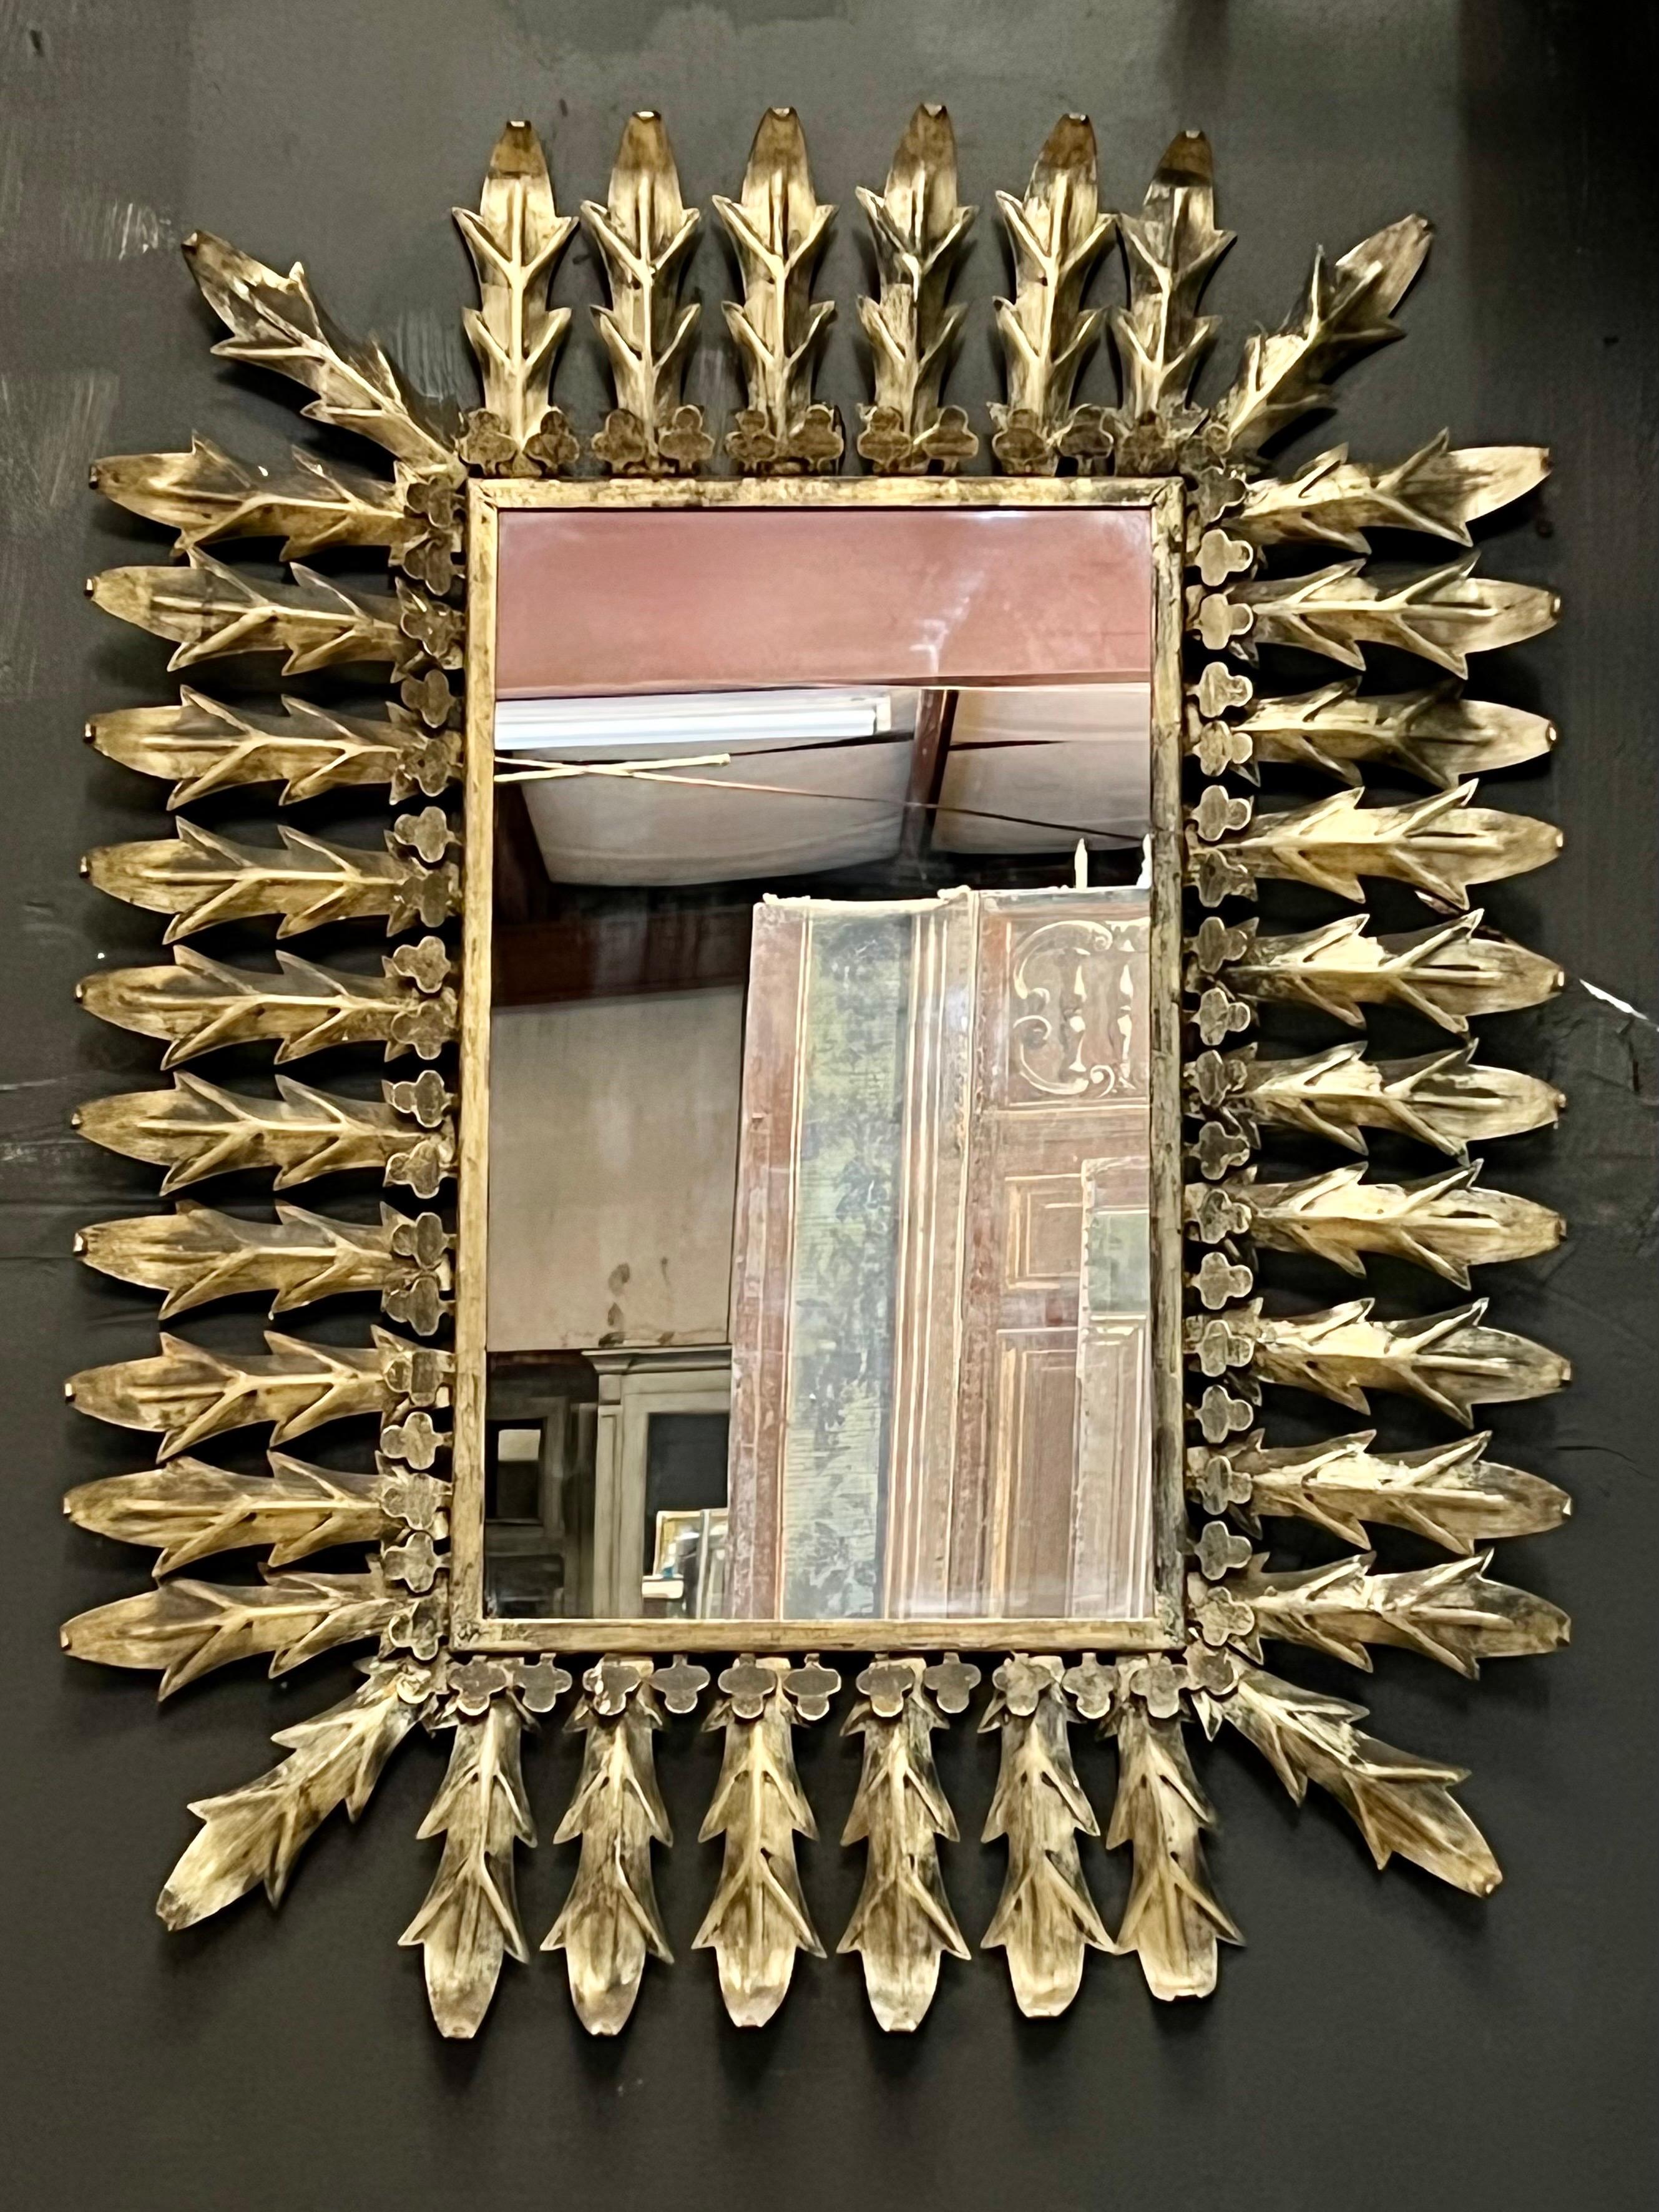 One of our favorite finds during our recent time in Spain is this vintage gilt mirror we discovered near Barcelona. The leaf and clover details are crafted in iron then hand gilt. We are listing it as vintage but it could be as old as turn of the